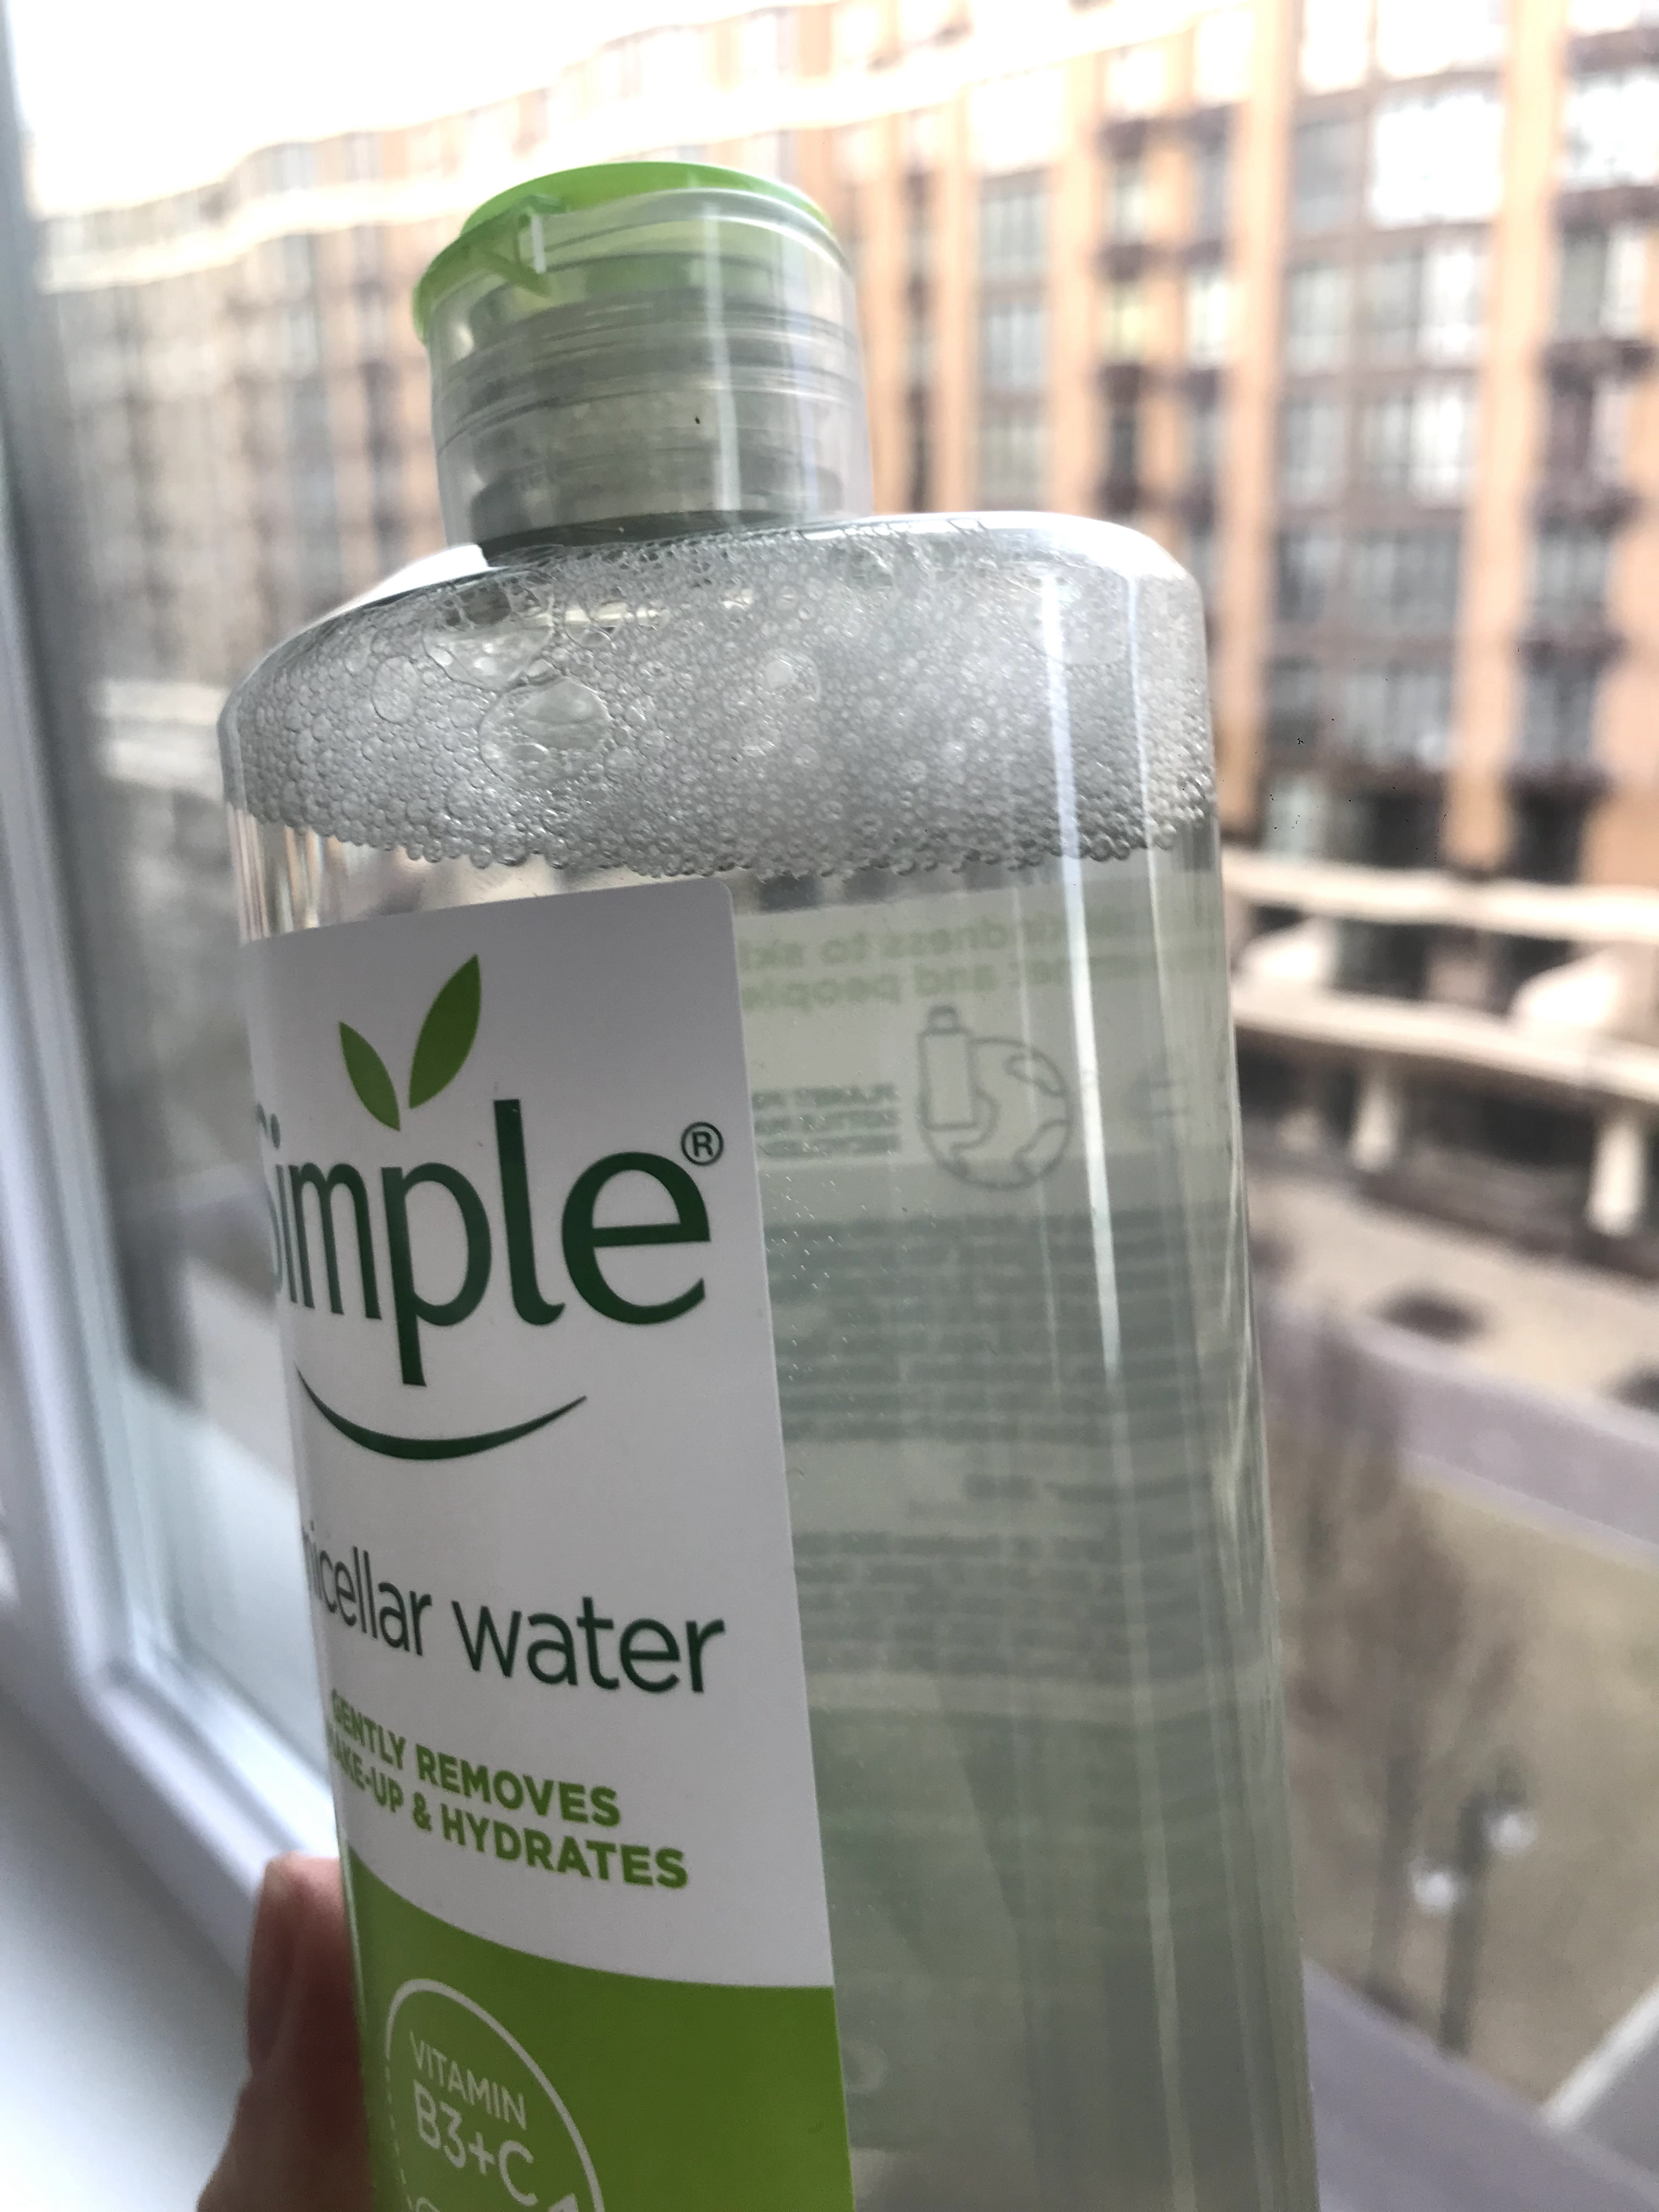 Міцелярна вода Simple Kind to Skin Micellar Water